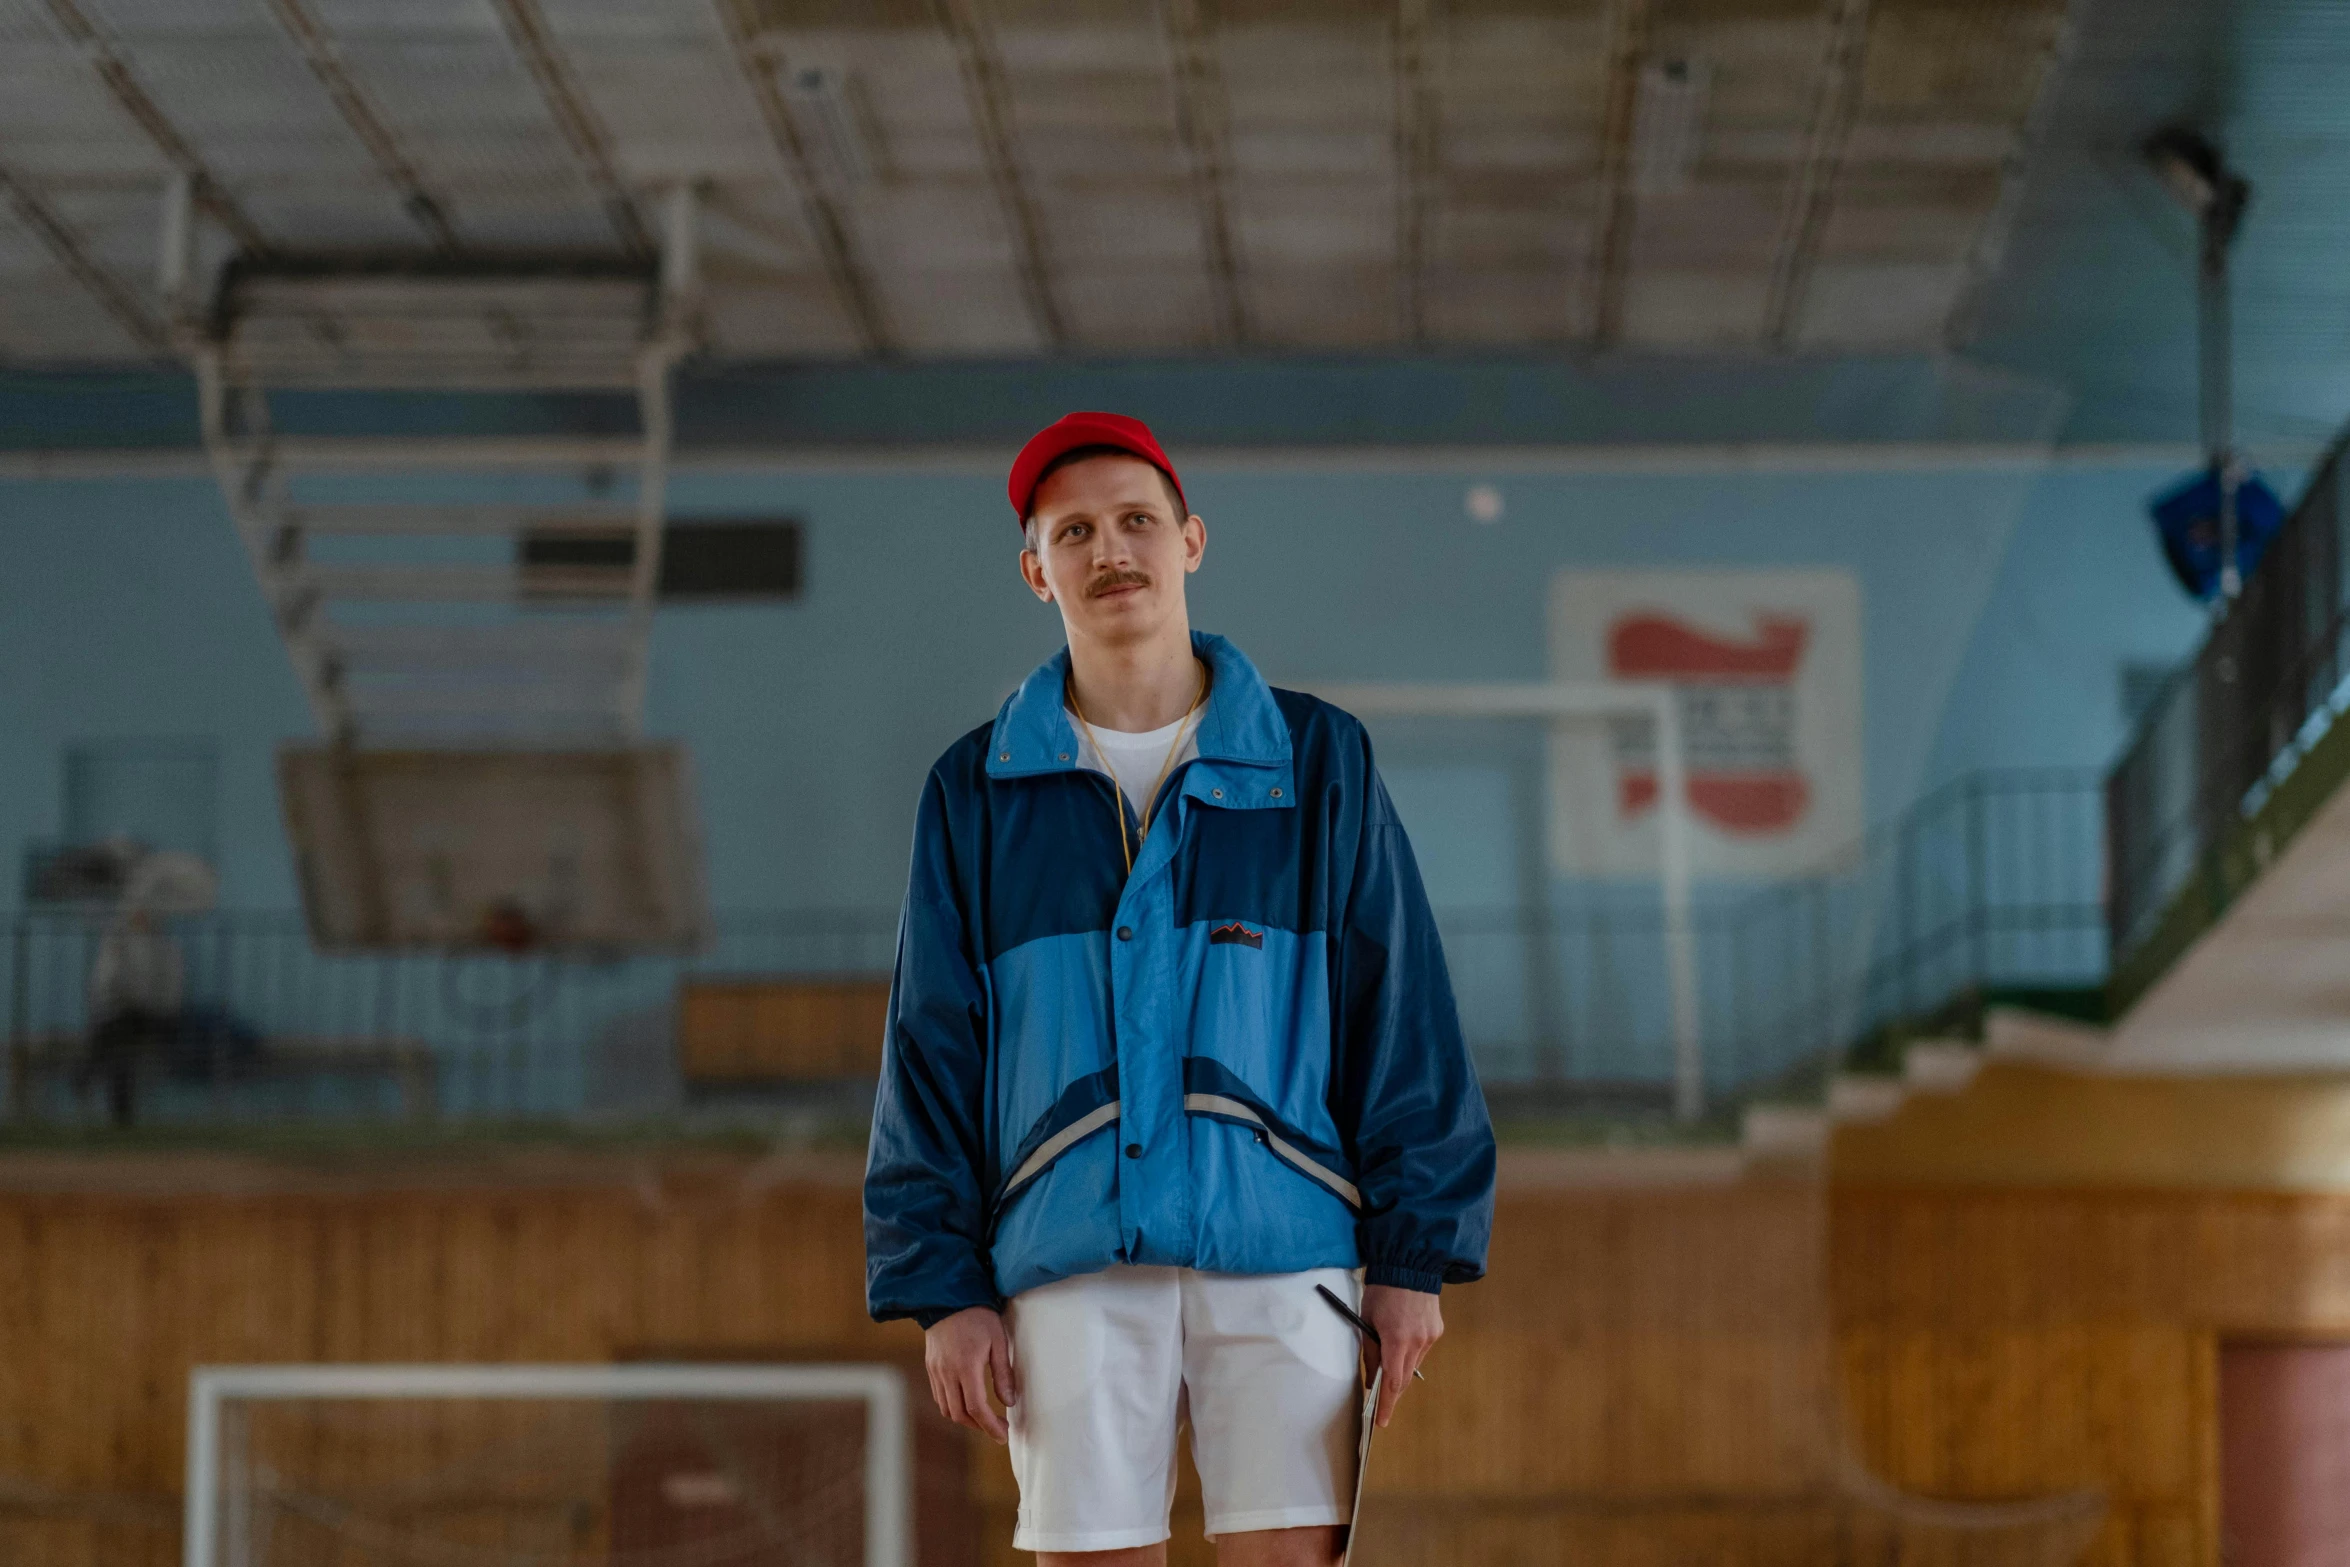 a man in a blue jacket and white shorts standing on a basketball court, by Attila Meszlenyi, unsplash, bauhaus, baggy clothing and hat, soviet style, indoor shot, portrait of small